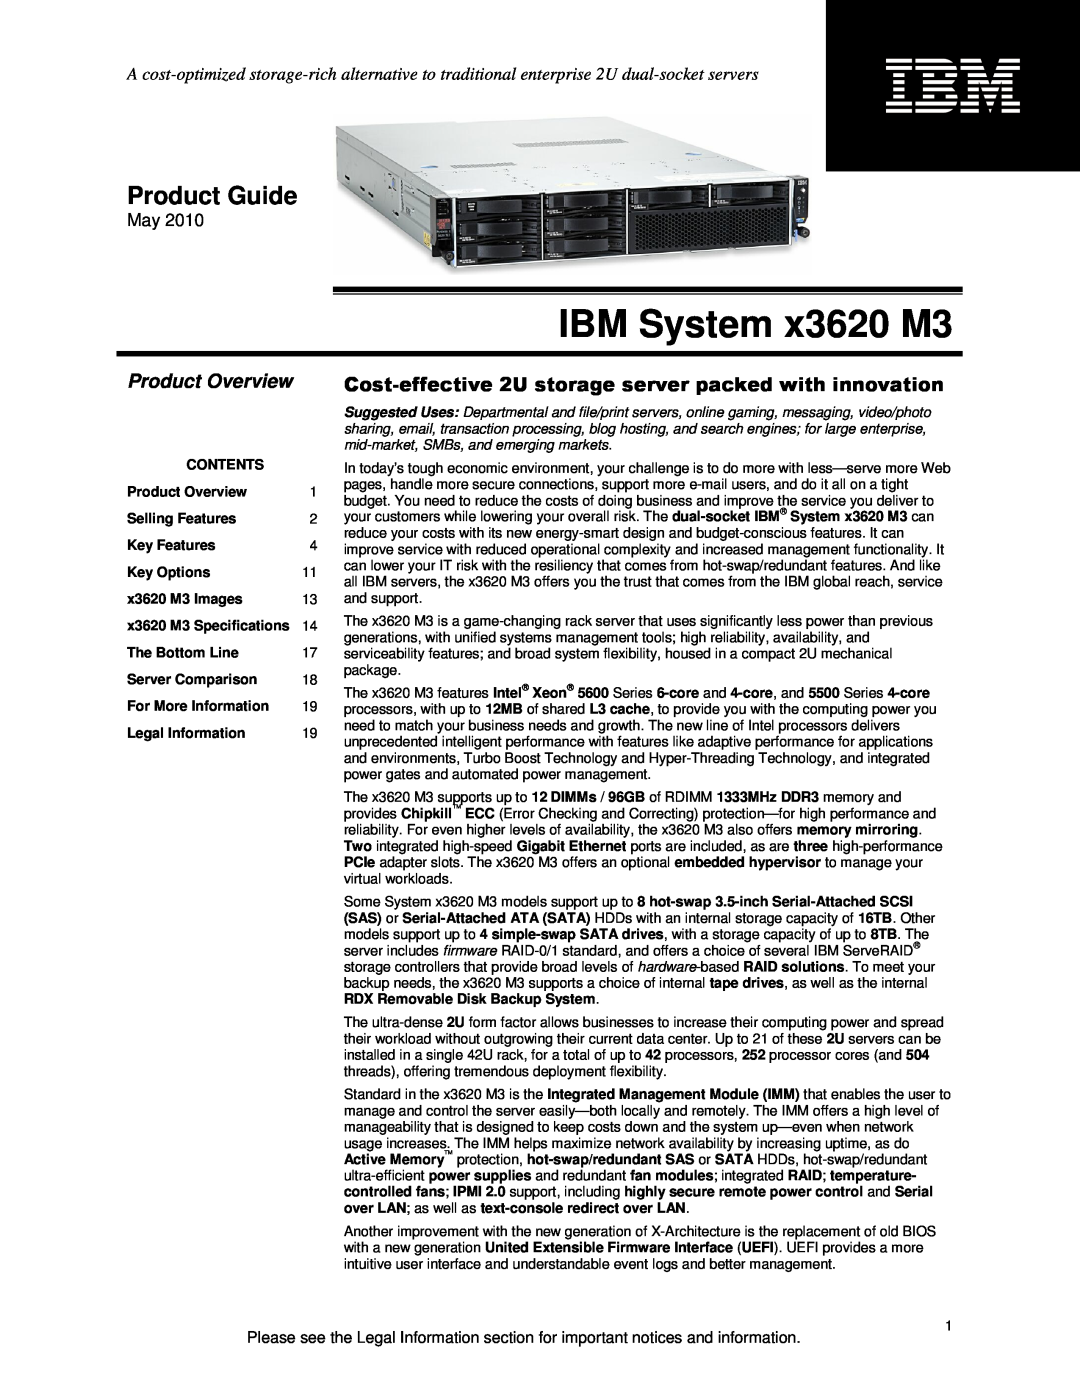 IBM X3620 M3 specifications Product Overview, IBM System x3620 M3, Product Guide 